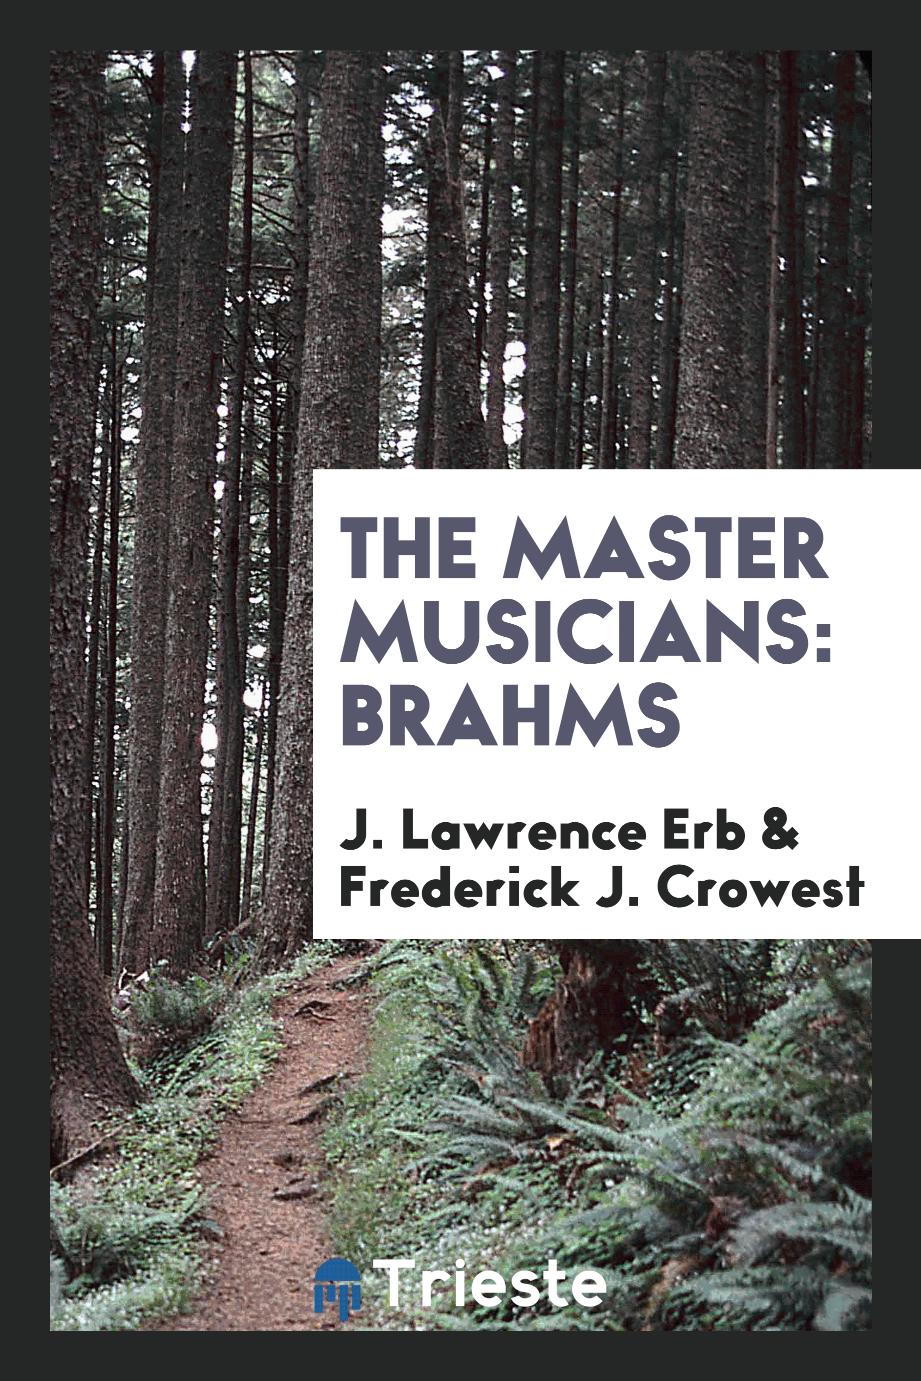 The Master Musicians: Brahms